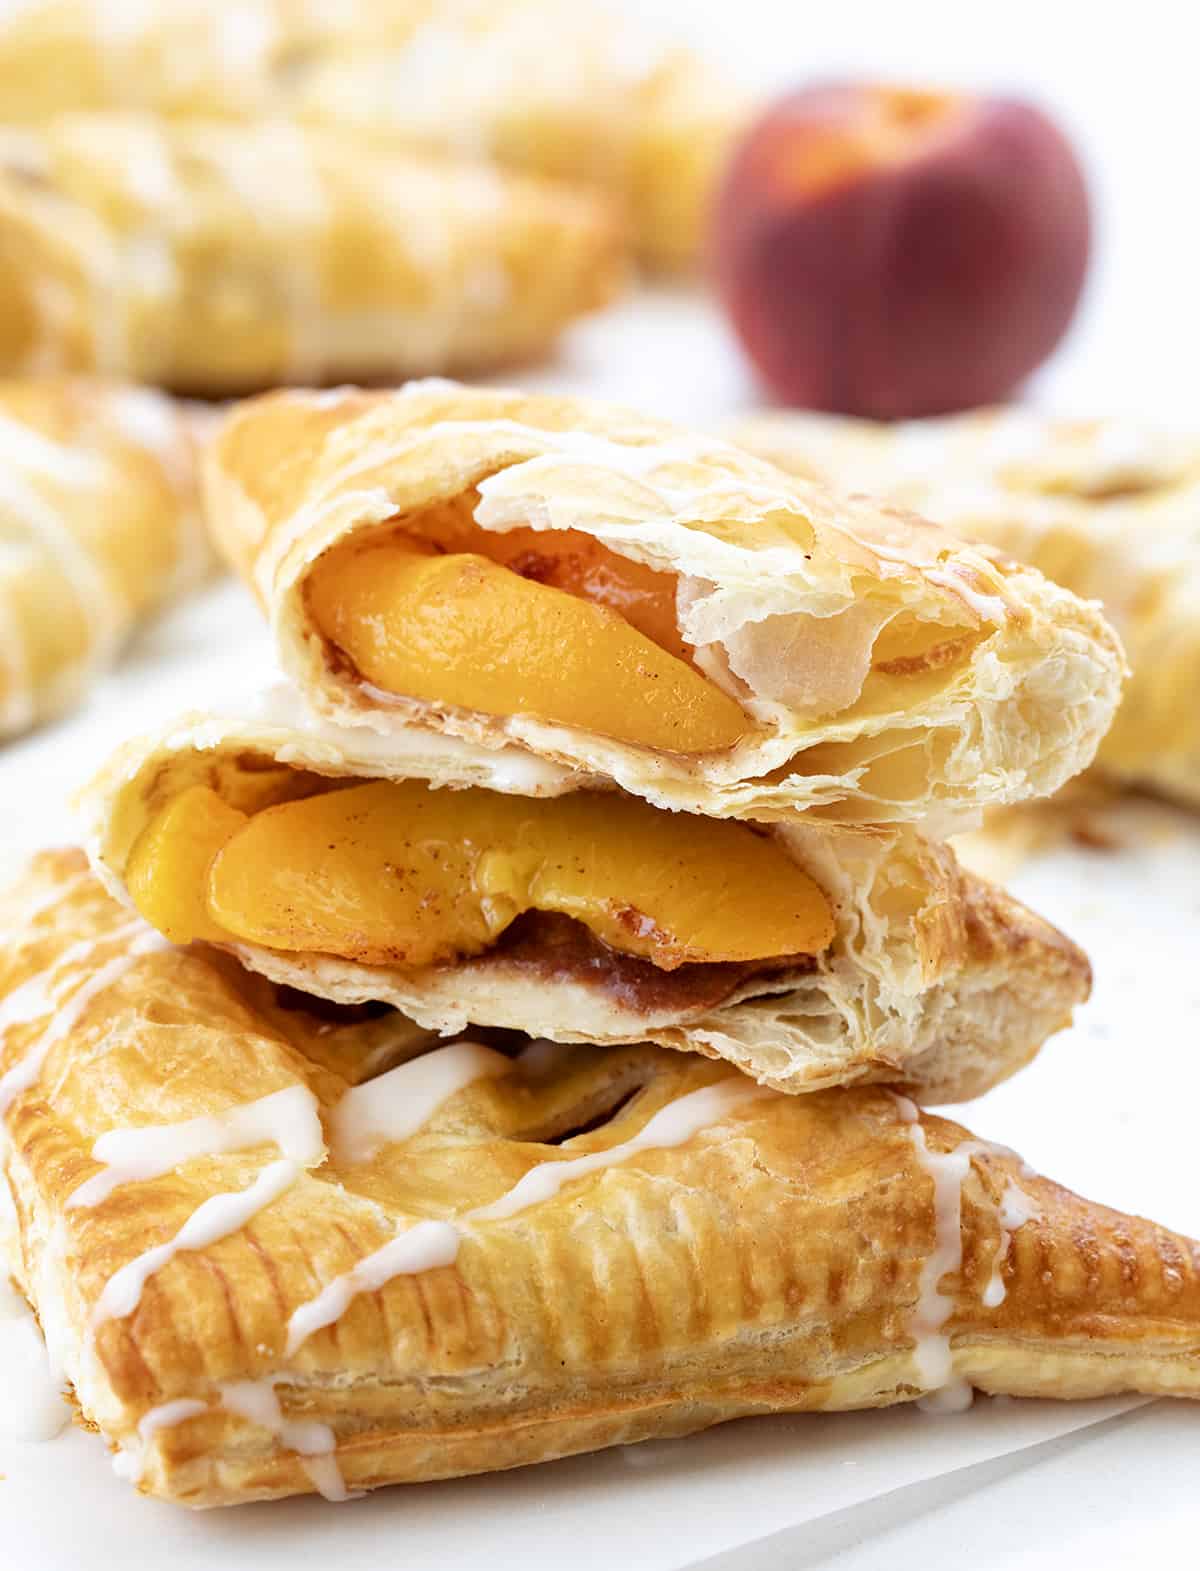 A Peach Turnovers Torn in Half Showing Peaches Inside.